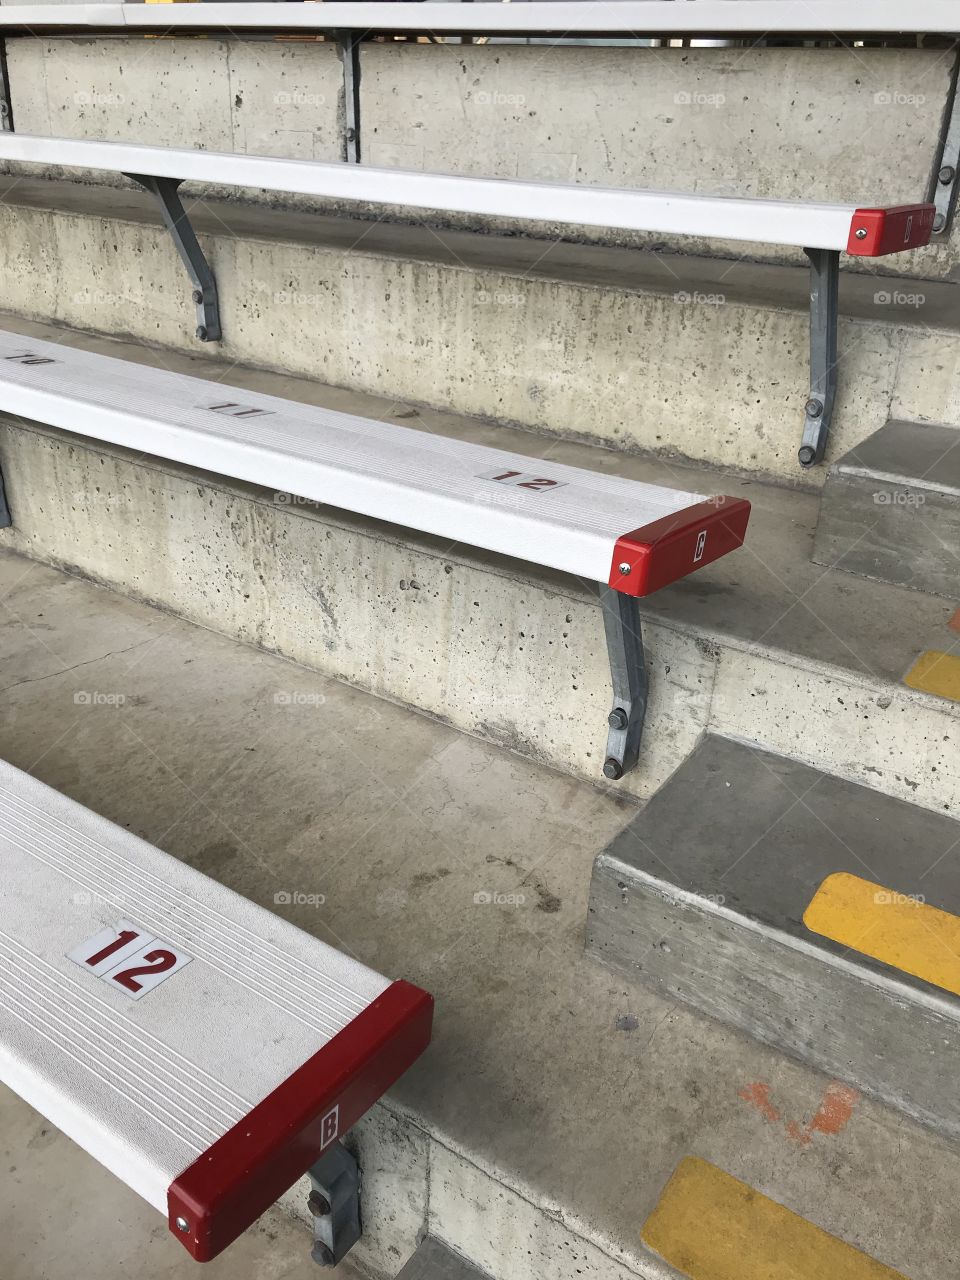 Soccer match. Seat yourself. 